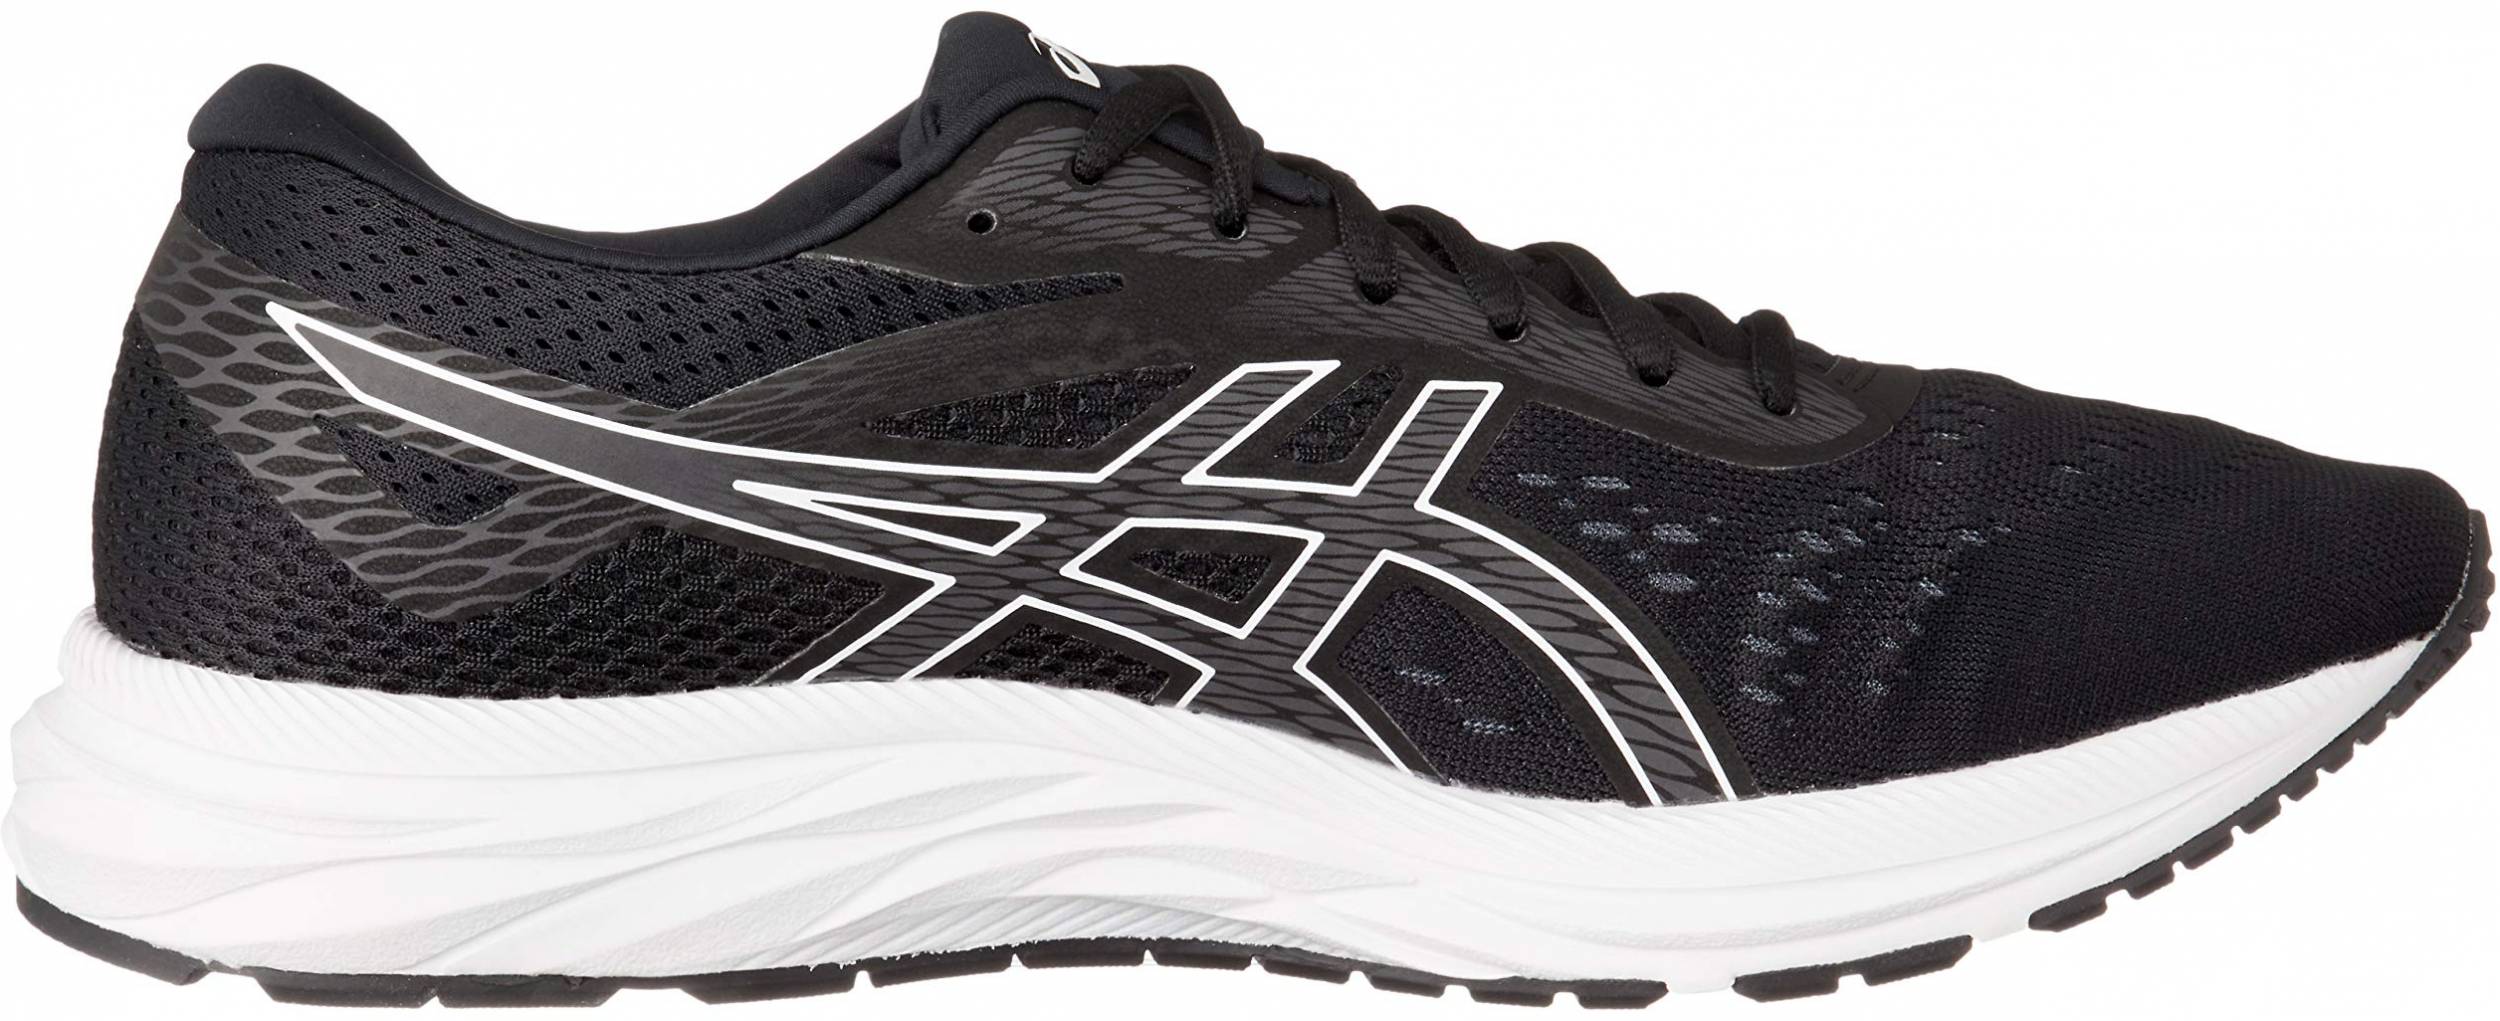 Only £36 + Review of Asics Gel Excite 6 